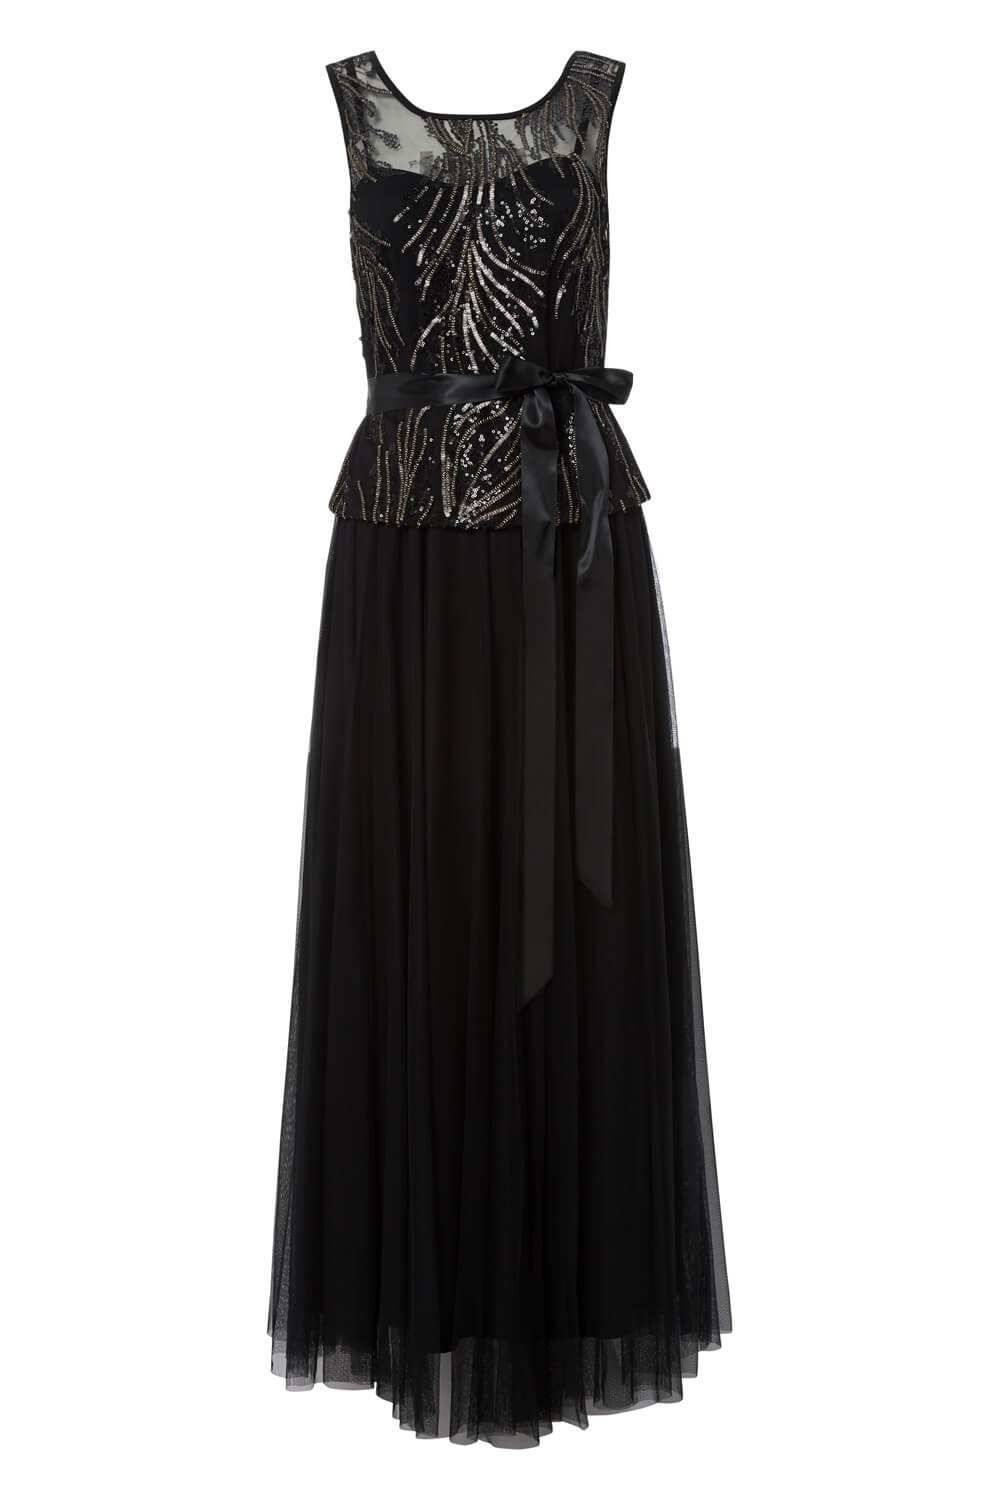 Black Sequin Tulle Maxi Dress, Image 5 of 5